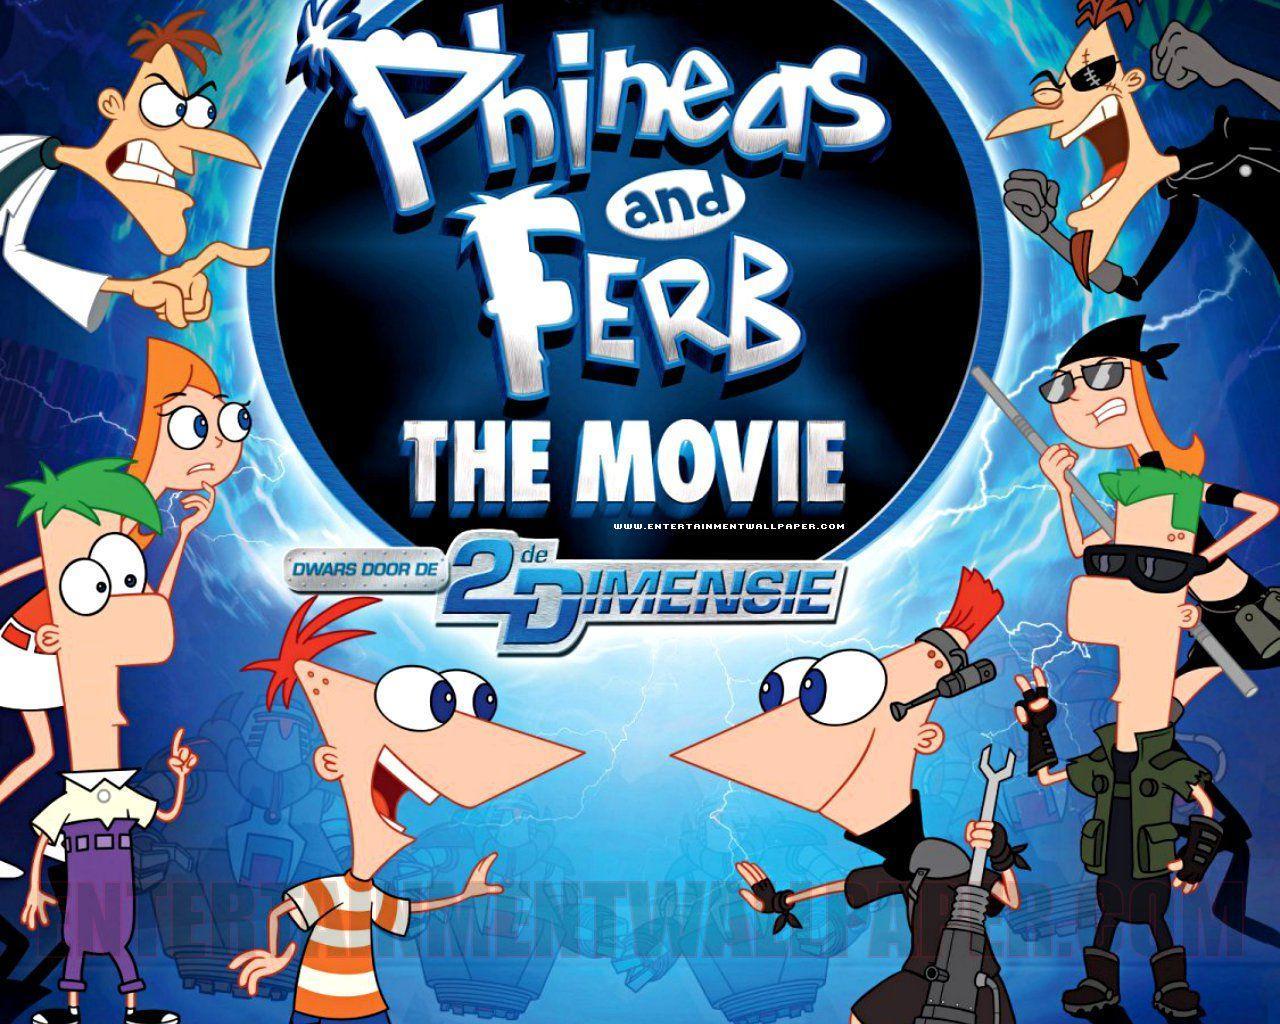 Free wallpapers HD: Phineas and Ferb Wallpapers